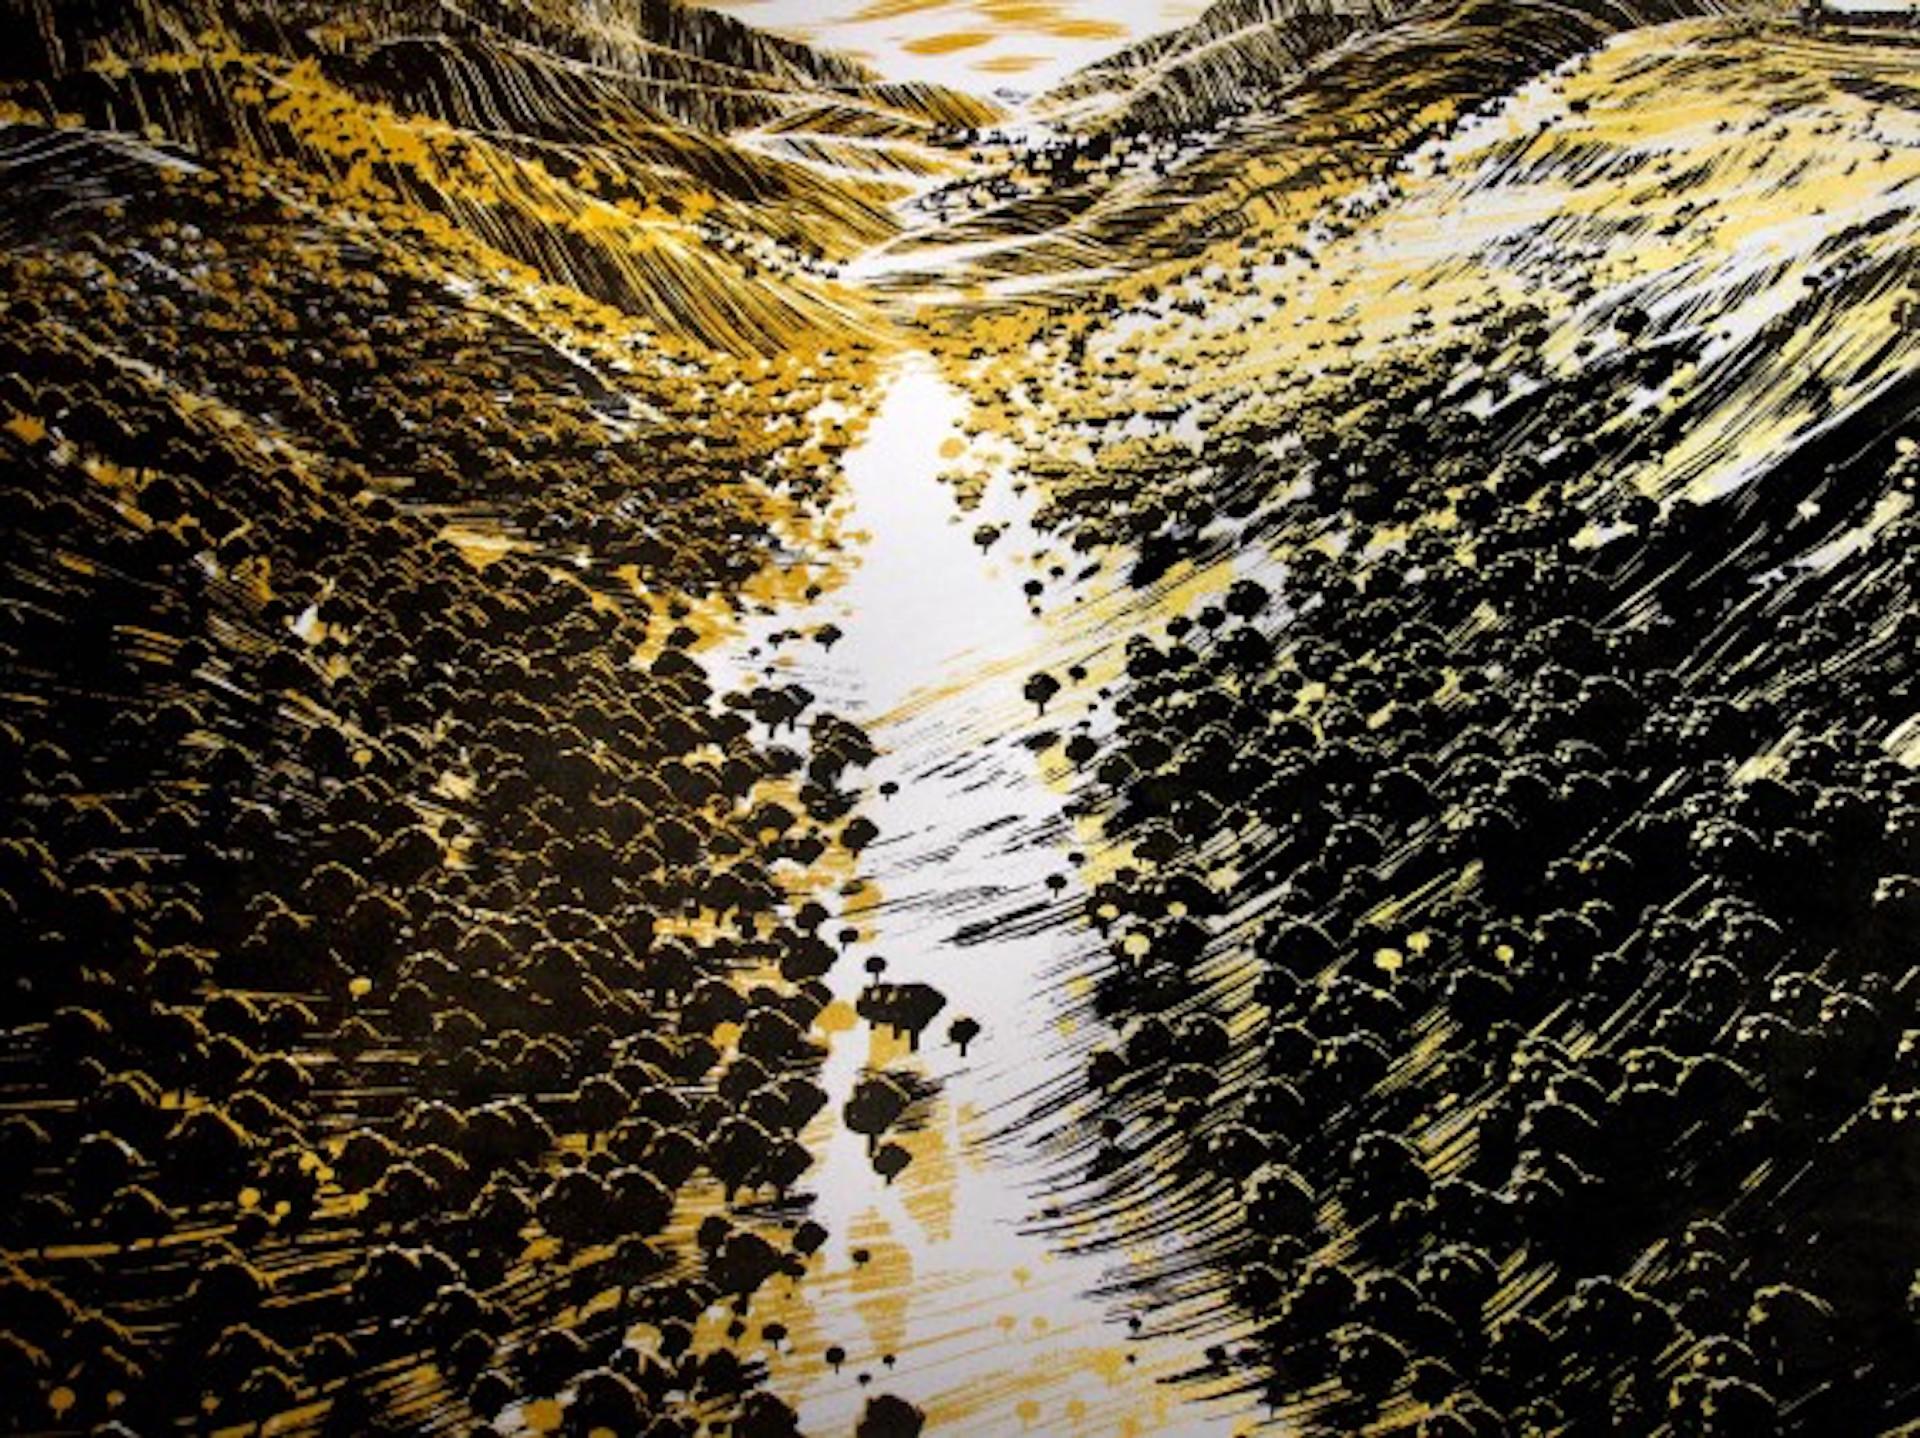 Valley of Gold By Chris Keegan [2021]
limited edition

Screen print

Edition of 40

Image size: H:56 cm x W:56 cm

Complete Size of Unframed Work: H:54 cm x W:54 cm x D:0.1cm

Sold Unframed

Please note that insitu images are purely an indication of